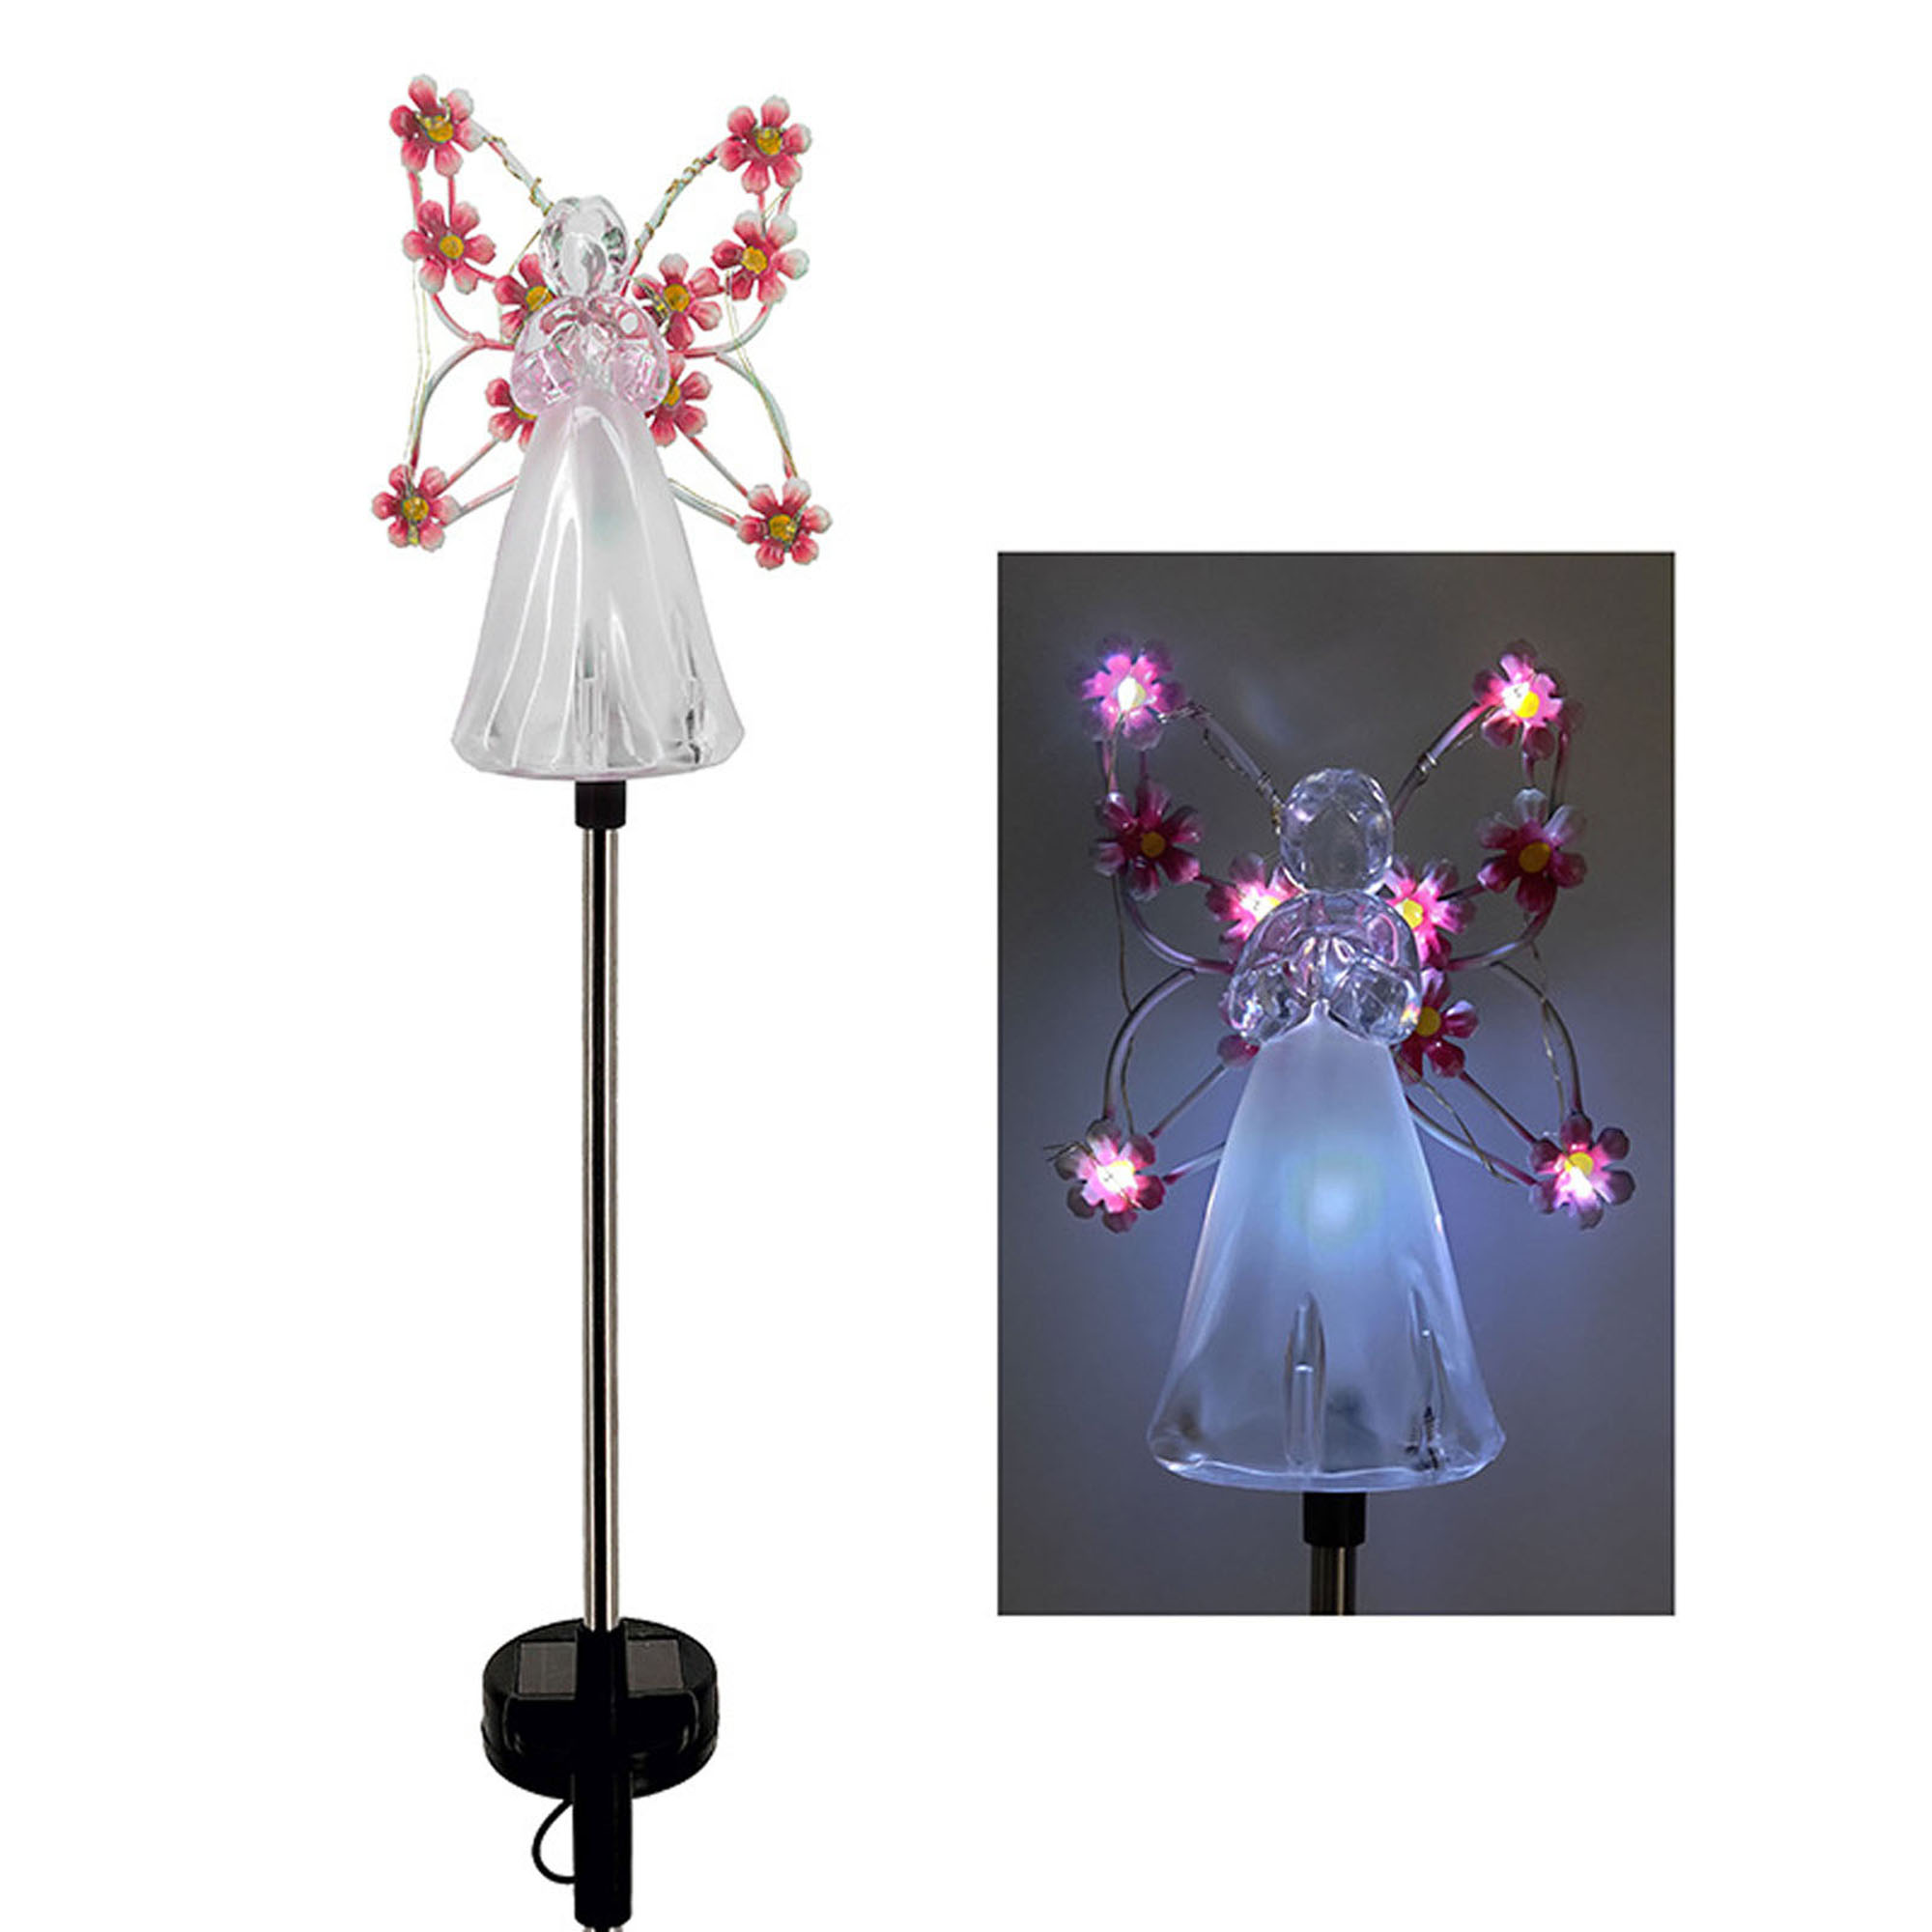 Solar Angel Garden Stake Lights, Angel lamp Solar Lawn Light Angel Solar Lawn Light Mothers Day Garden Gifts Garden Angel Grave Markers for Cemetery Garden Decoration Solar Angel Light Yellow - image 2 of 3